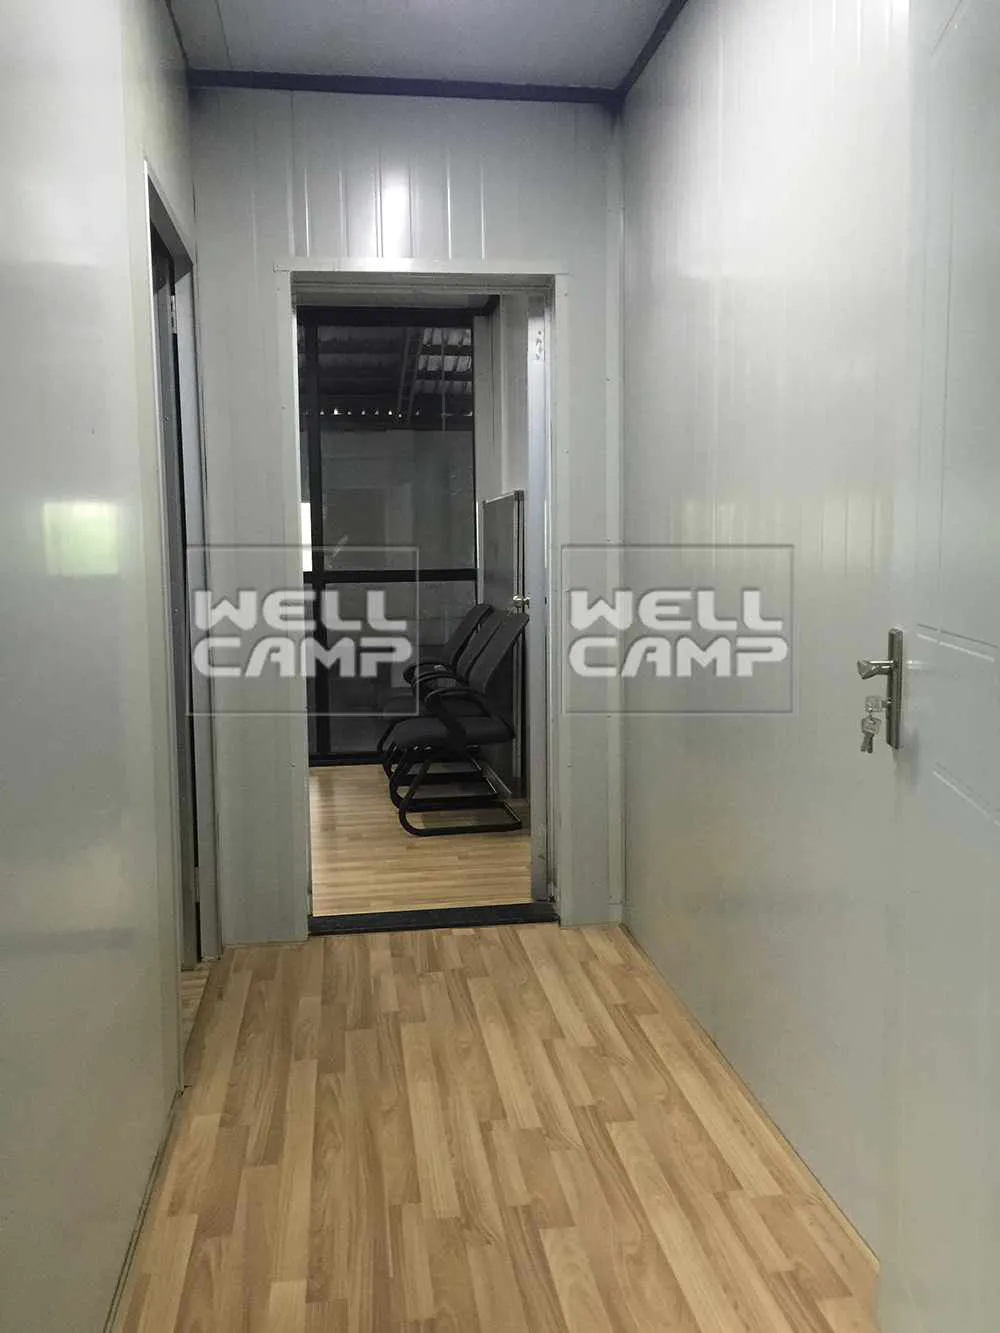 Wellcamp Detachable Container Office Project in Singapore